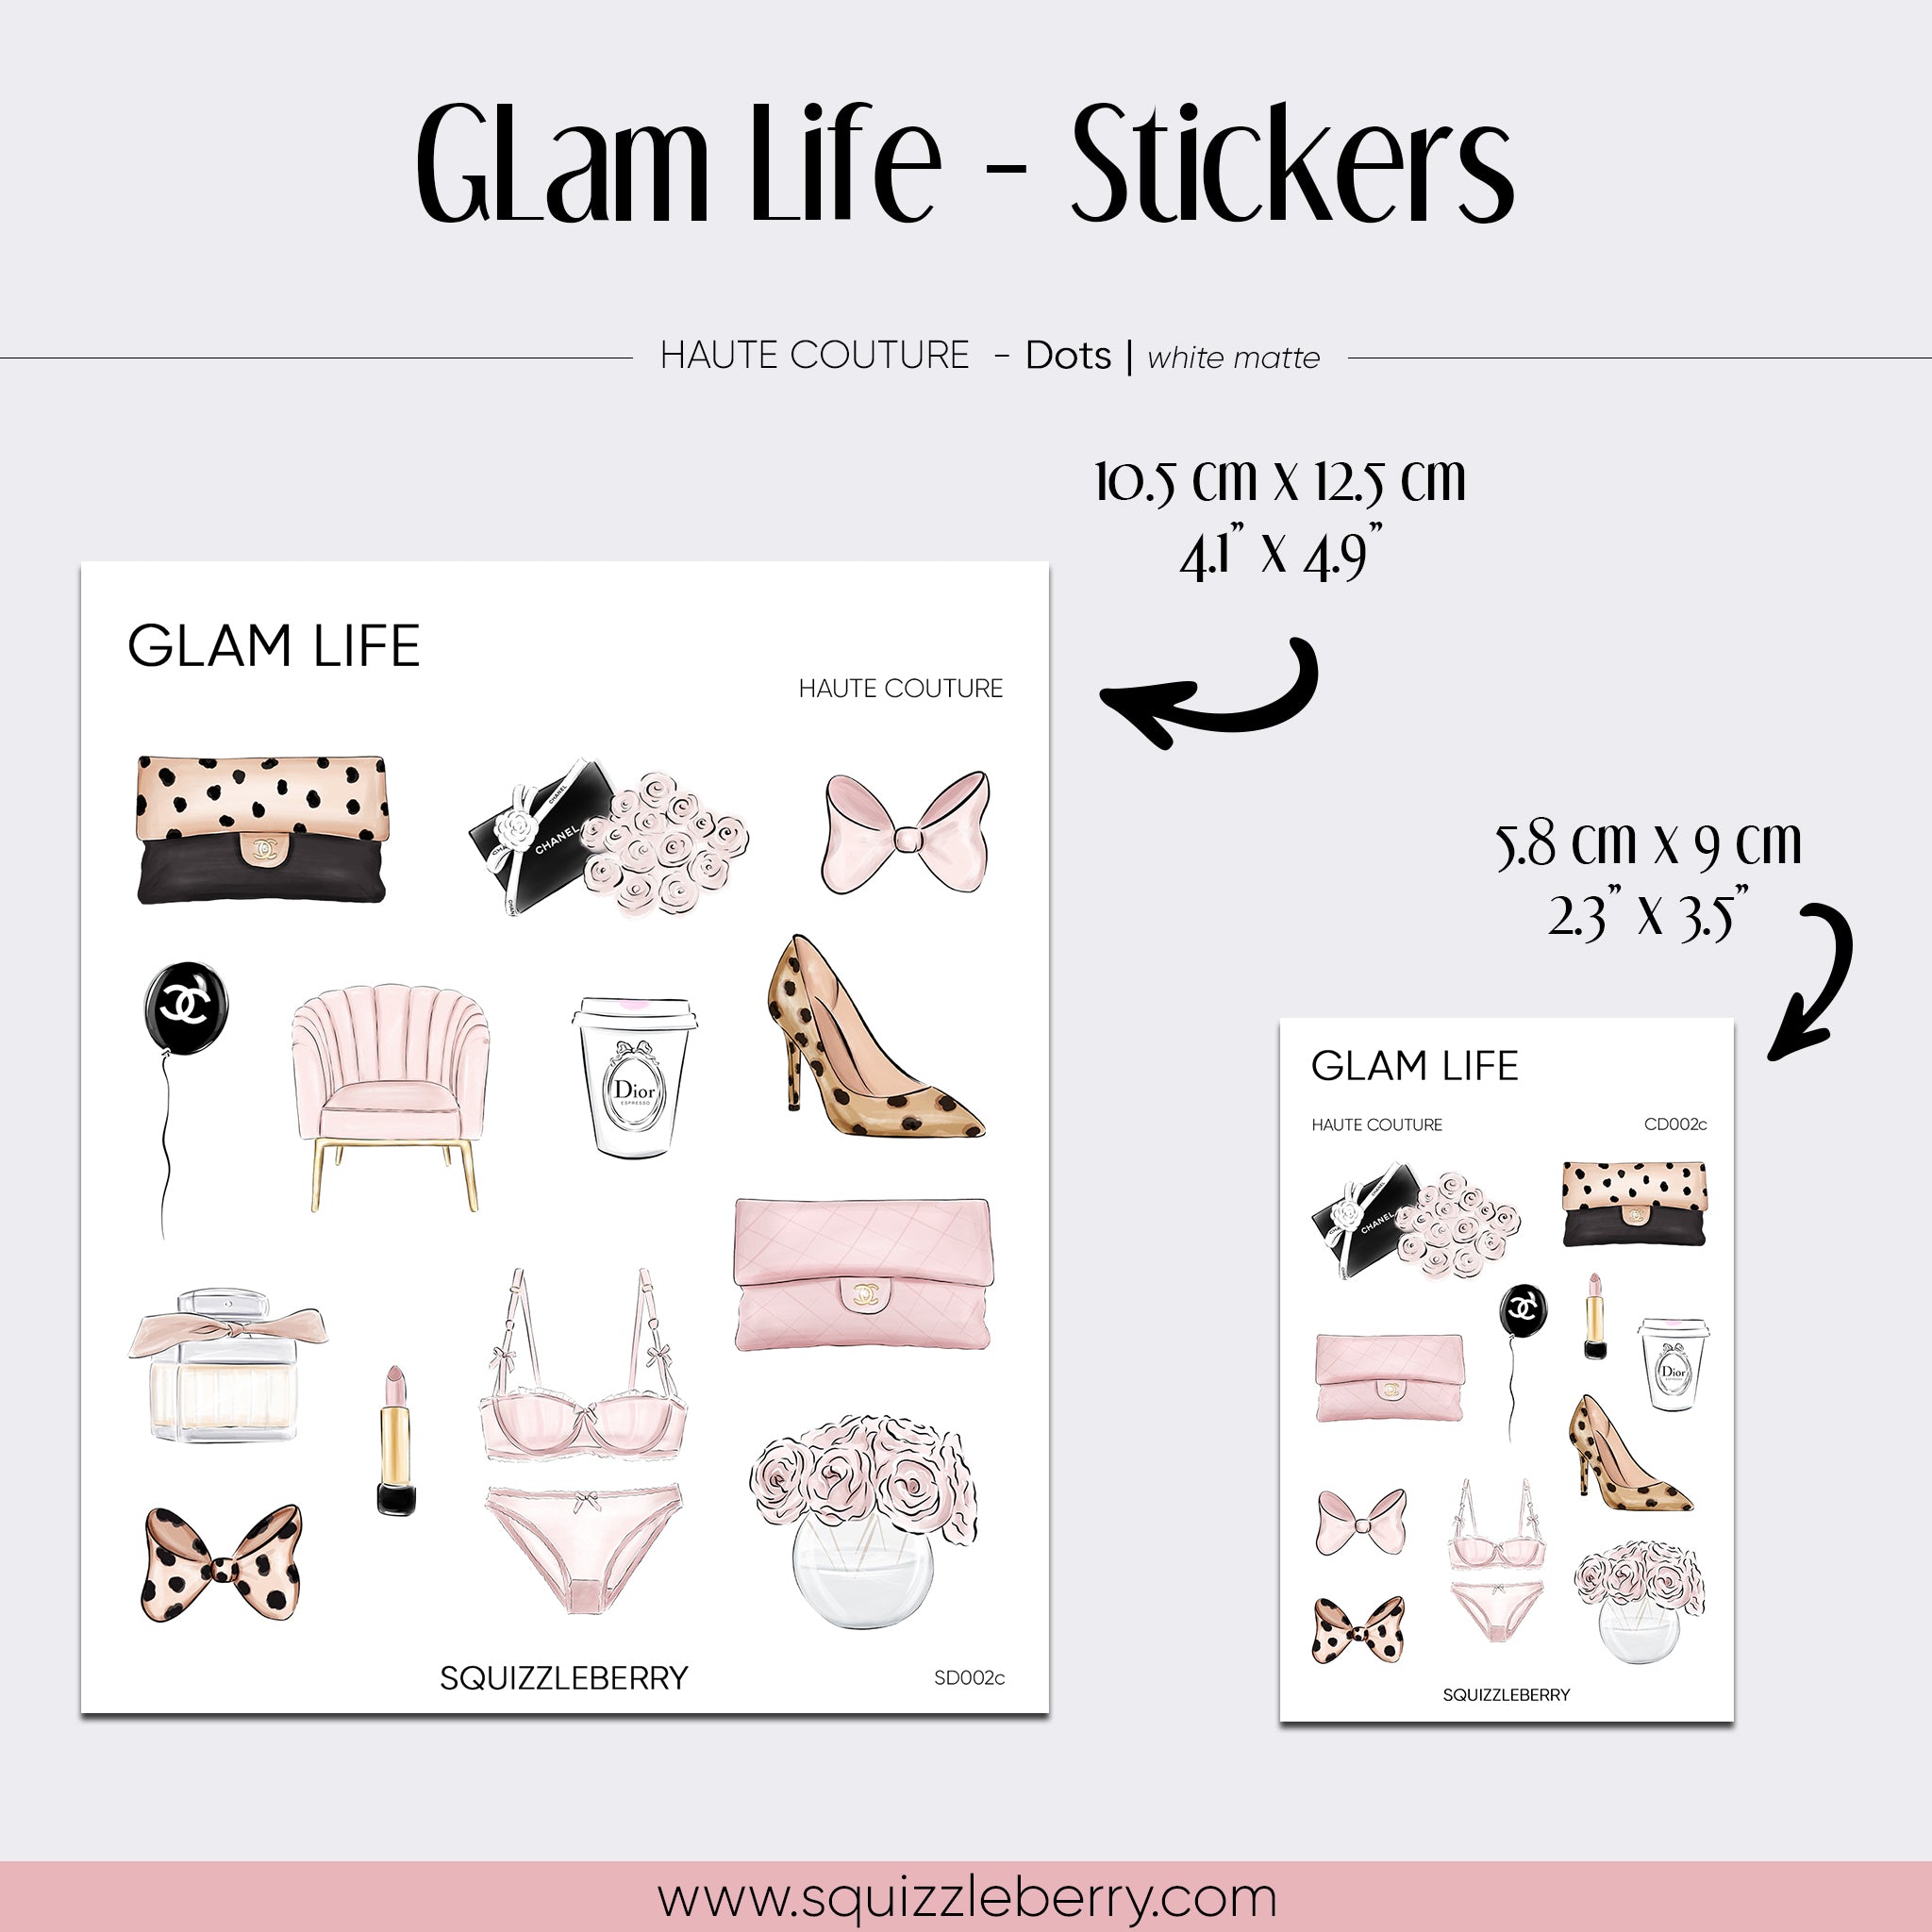 Glam Life - Stickers | SquizzleBerry